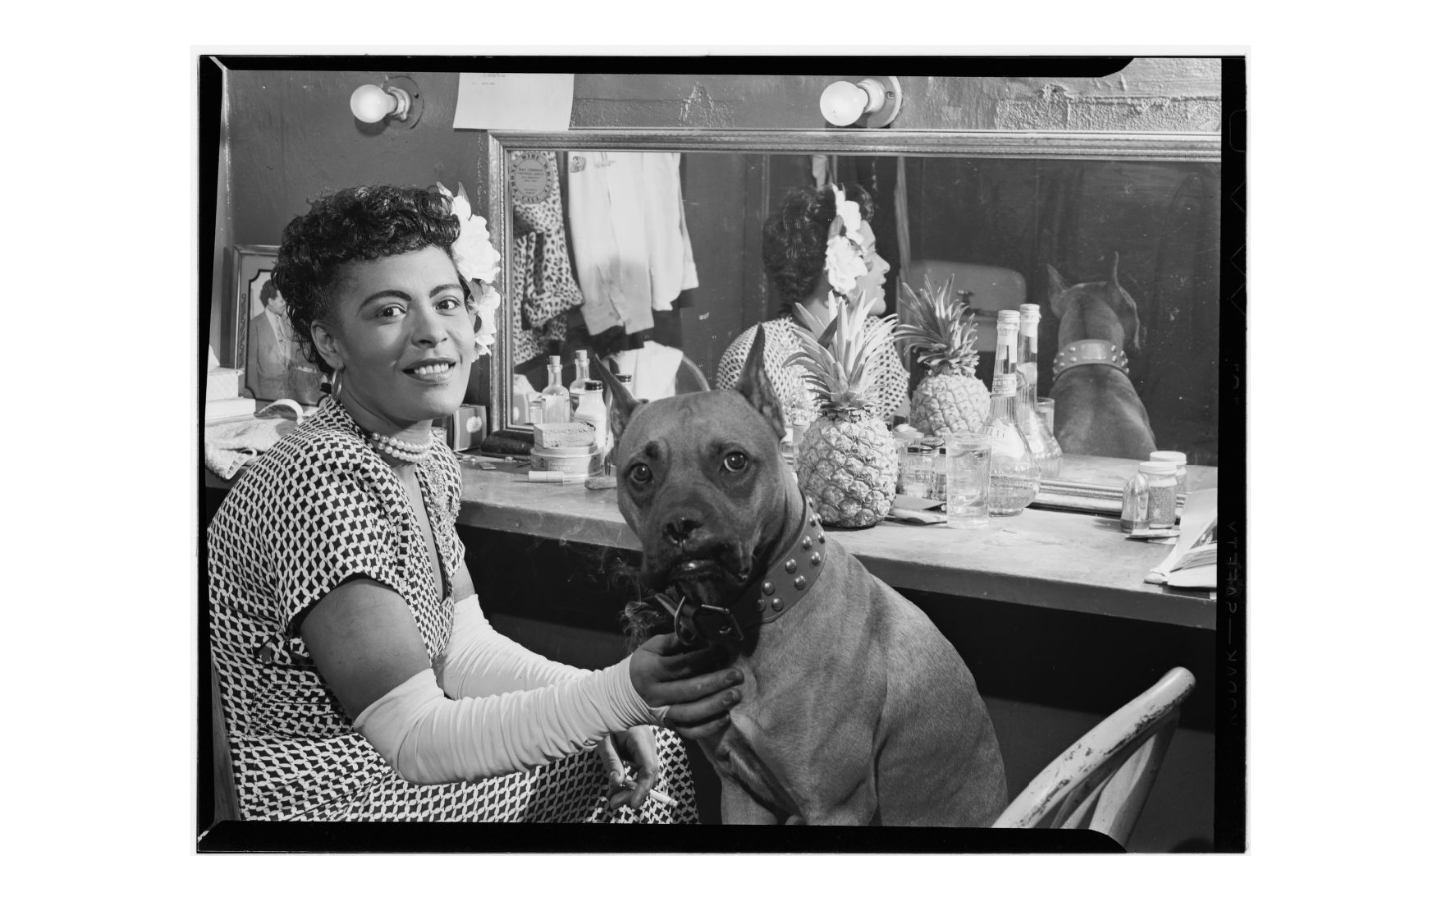 1946 - Billie Holiday and Mister at Downbeat, NYC